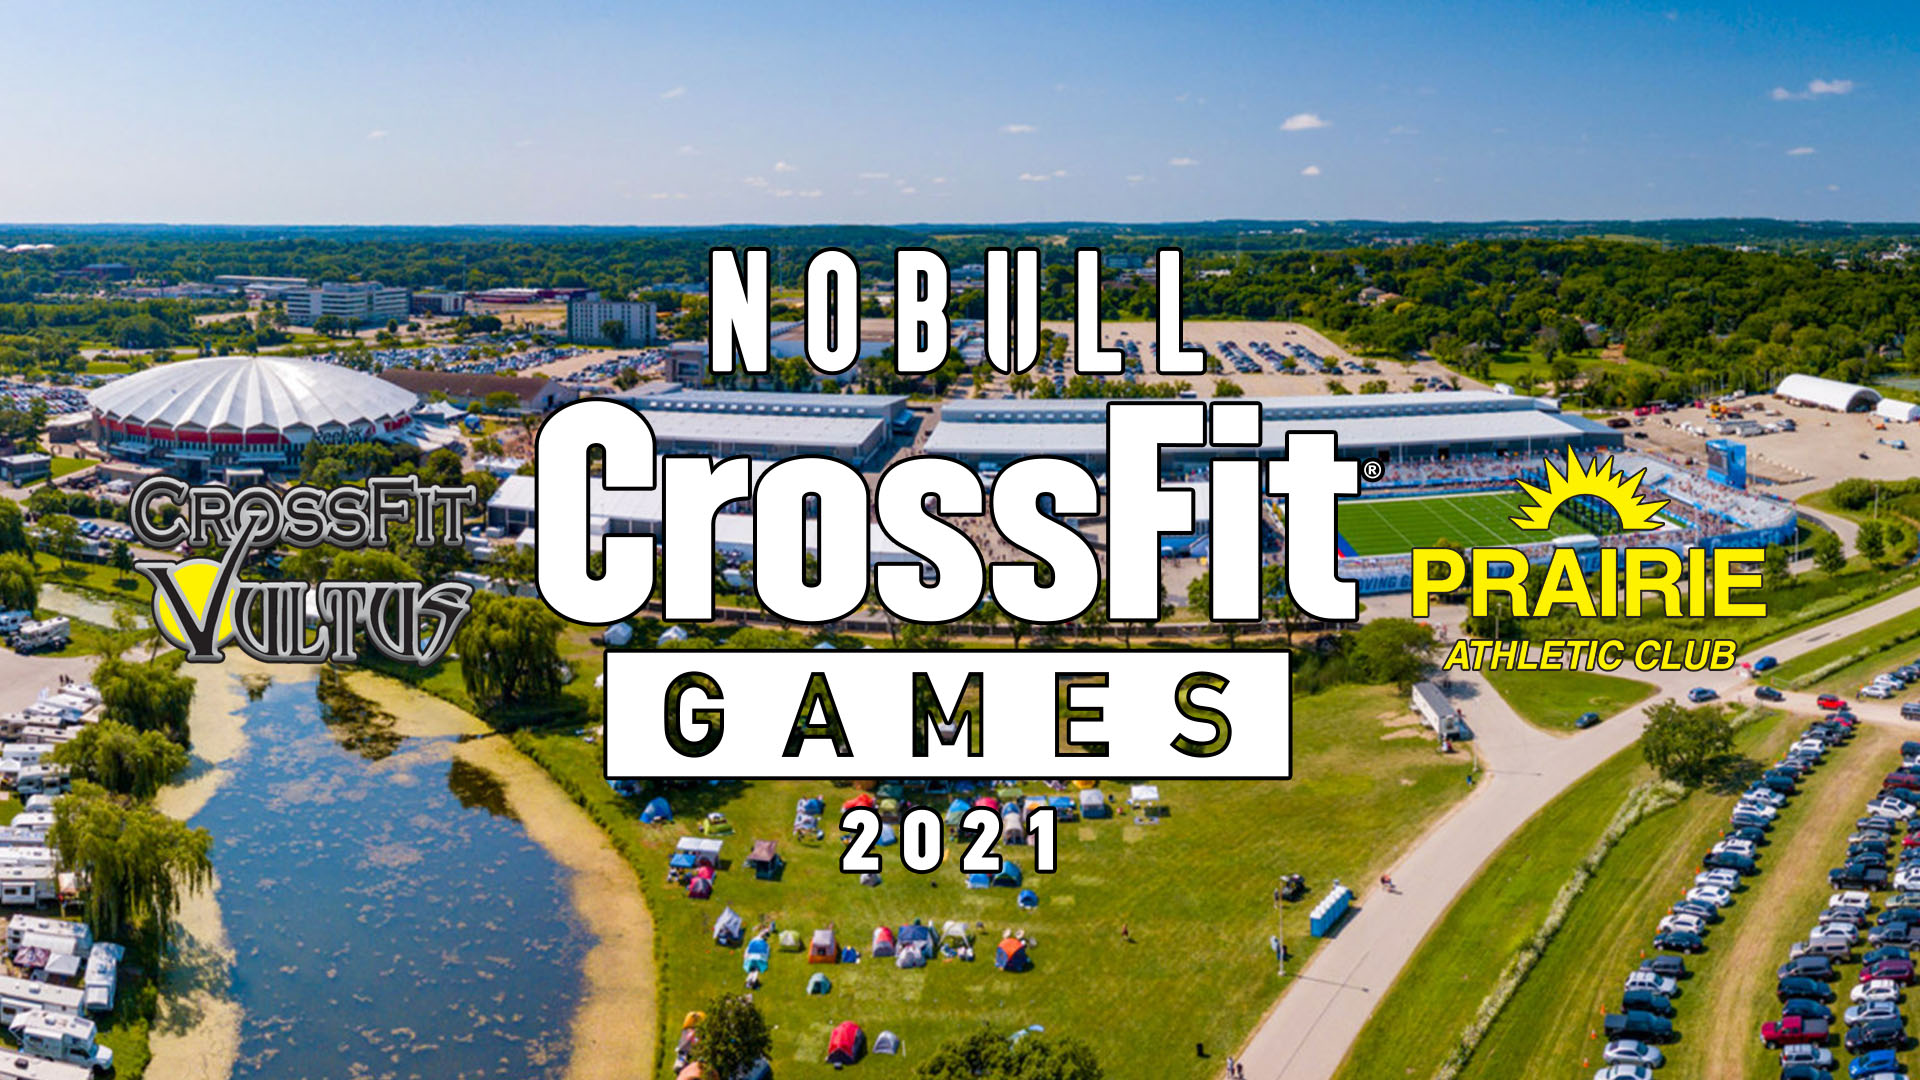 Crossfit Games Madison 2021 with Crossfit Vultus and Prairie Athletic Club